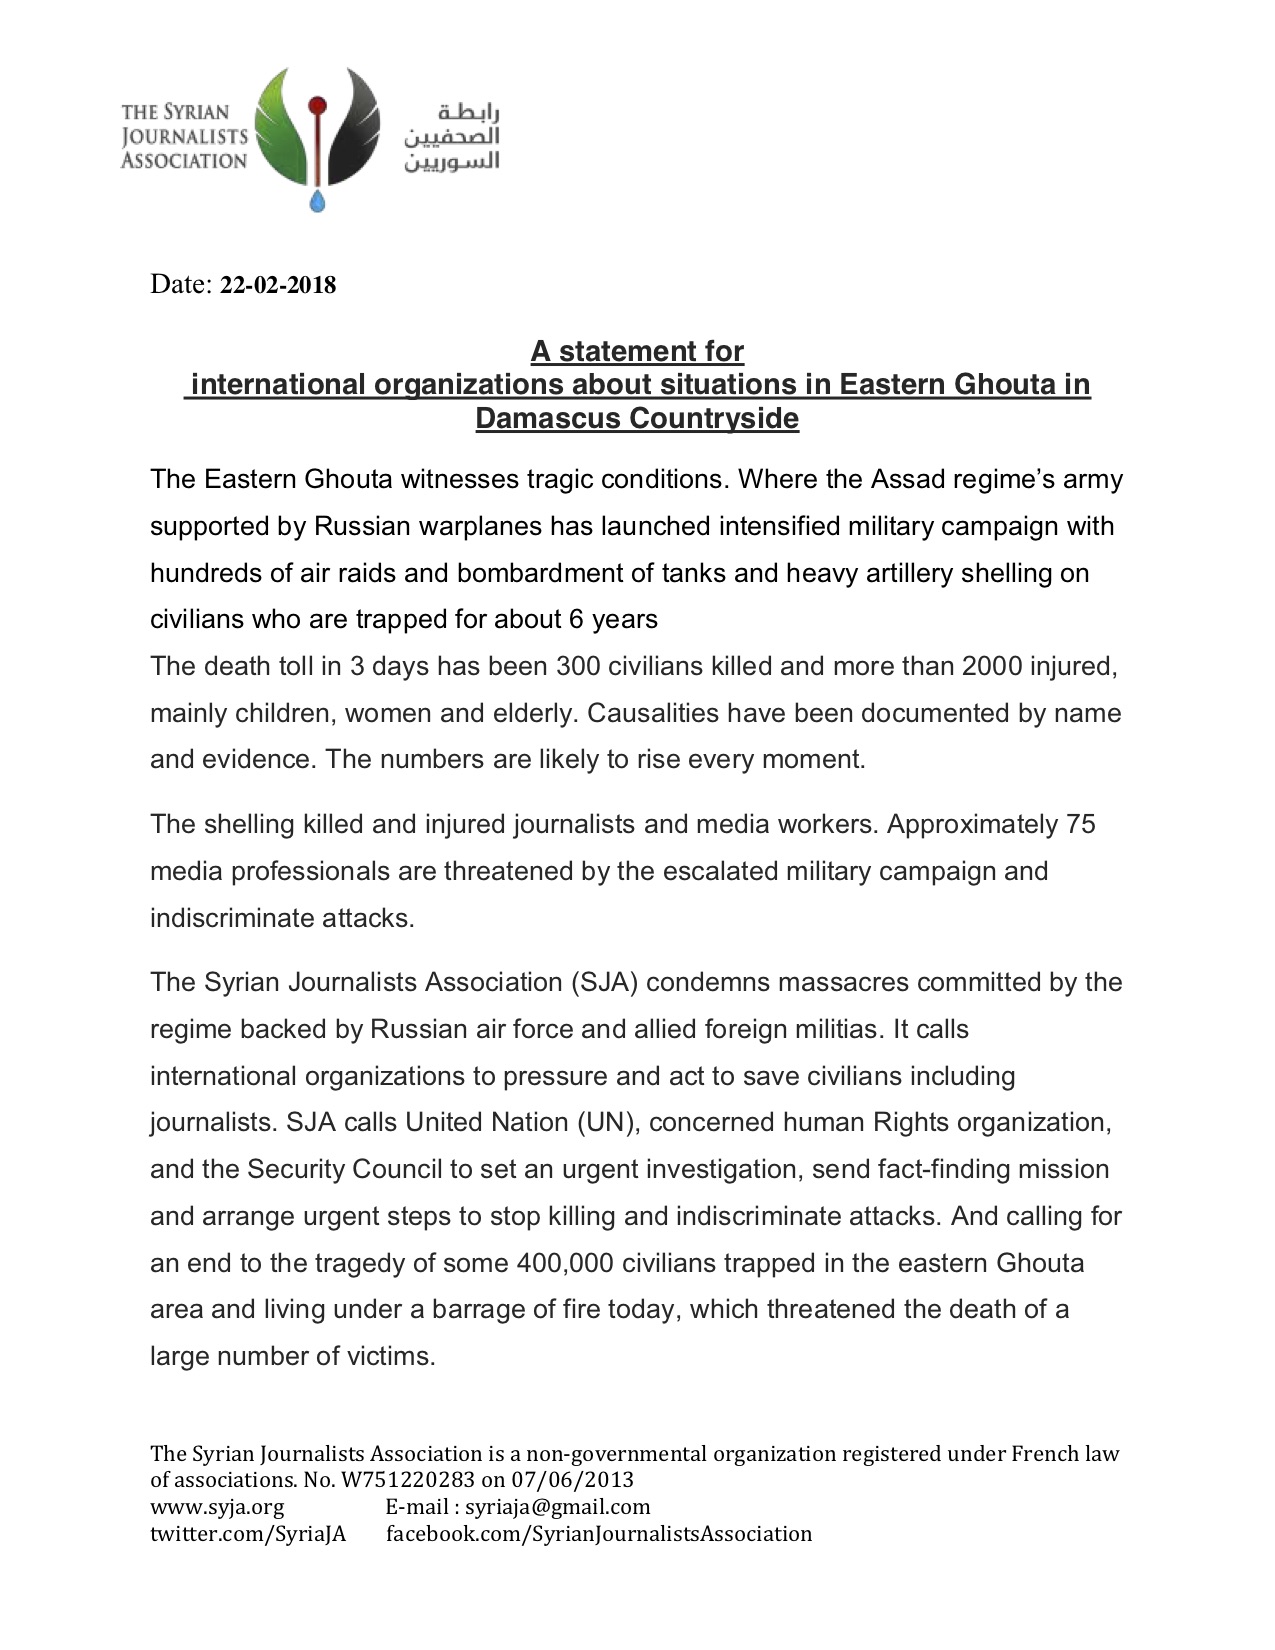 A statement by the Syrian Journalists Association 